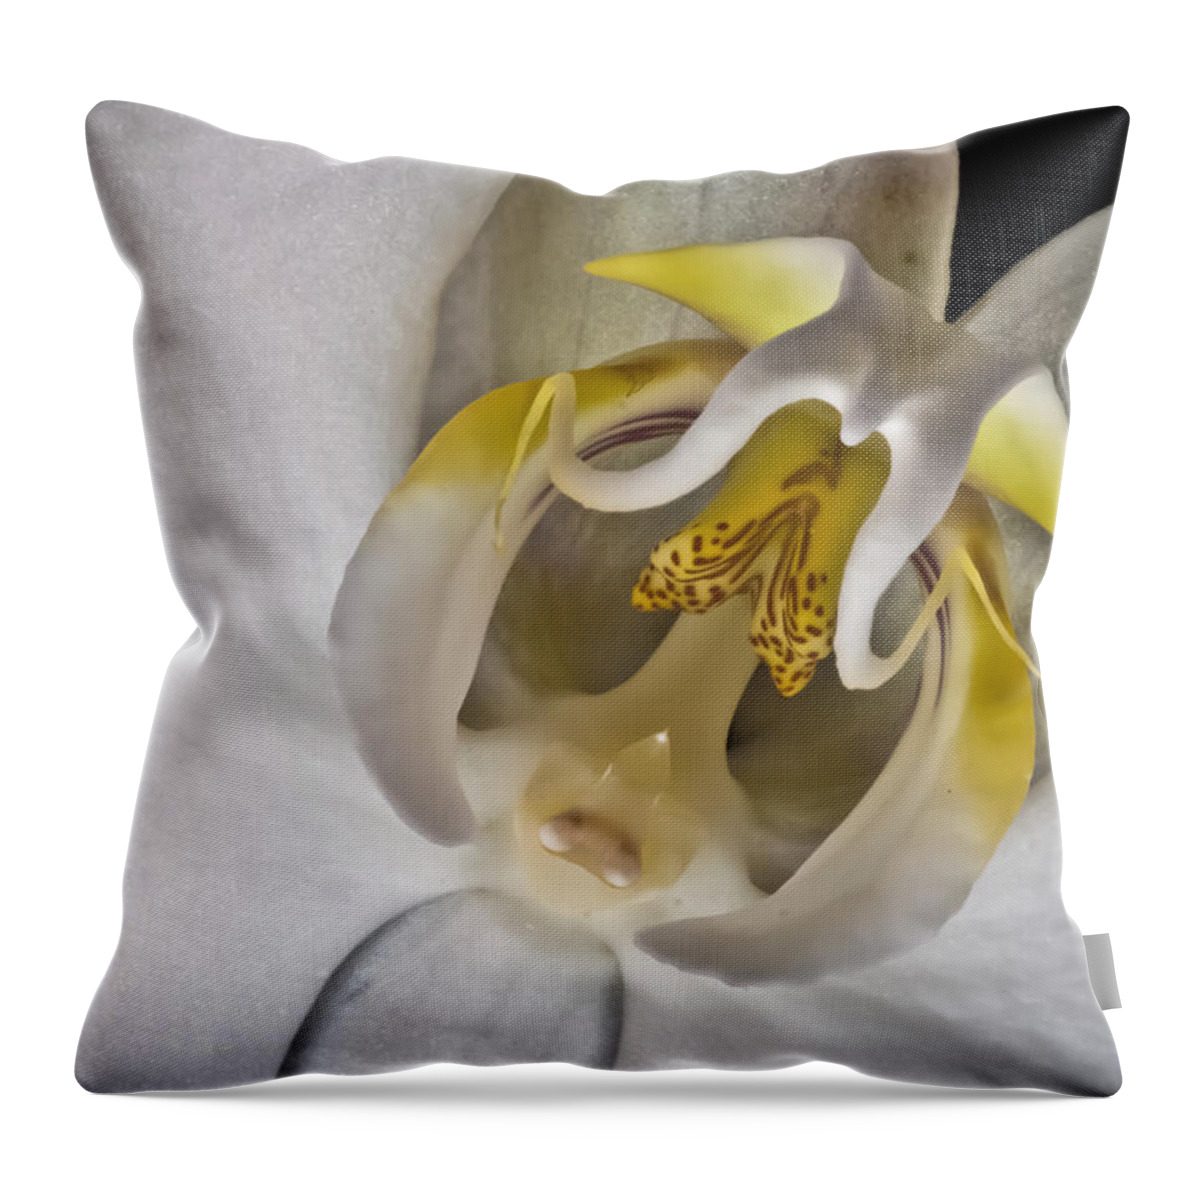 Moth Orchid Throw Pillow featuring the photograph Moth Orchid Inverted by Ron White